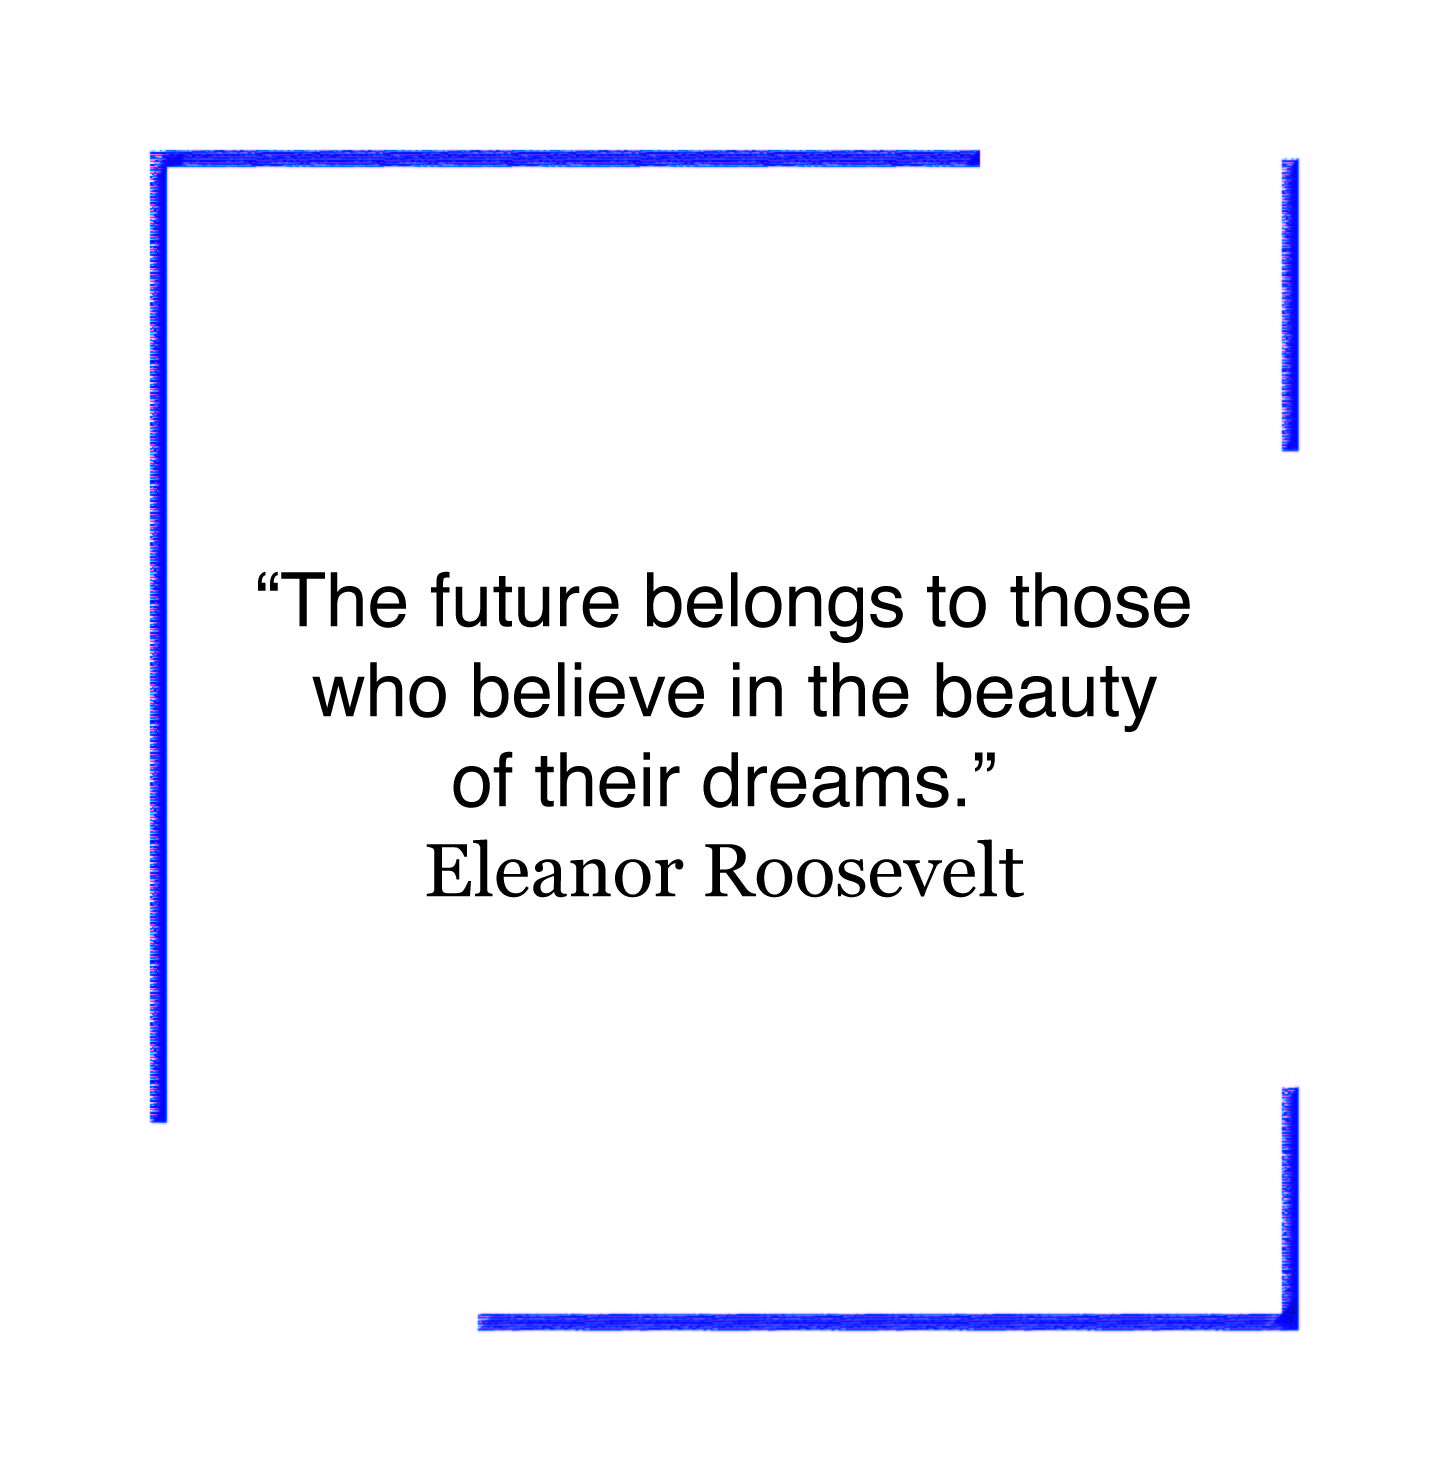 The future belongs to those who believe in the beauty of their dreams. Eleanor Roosevelt.